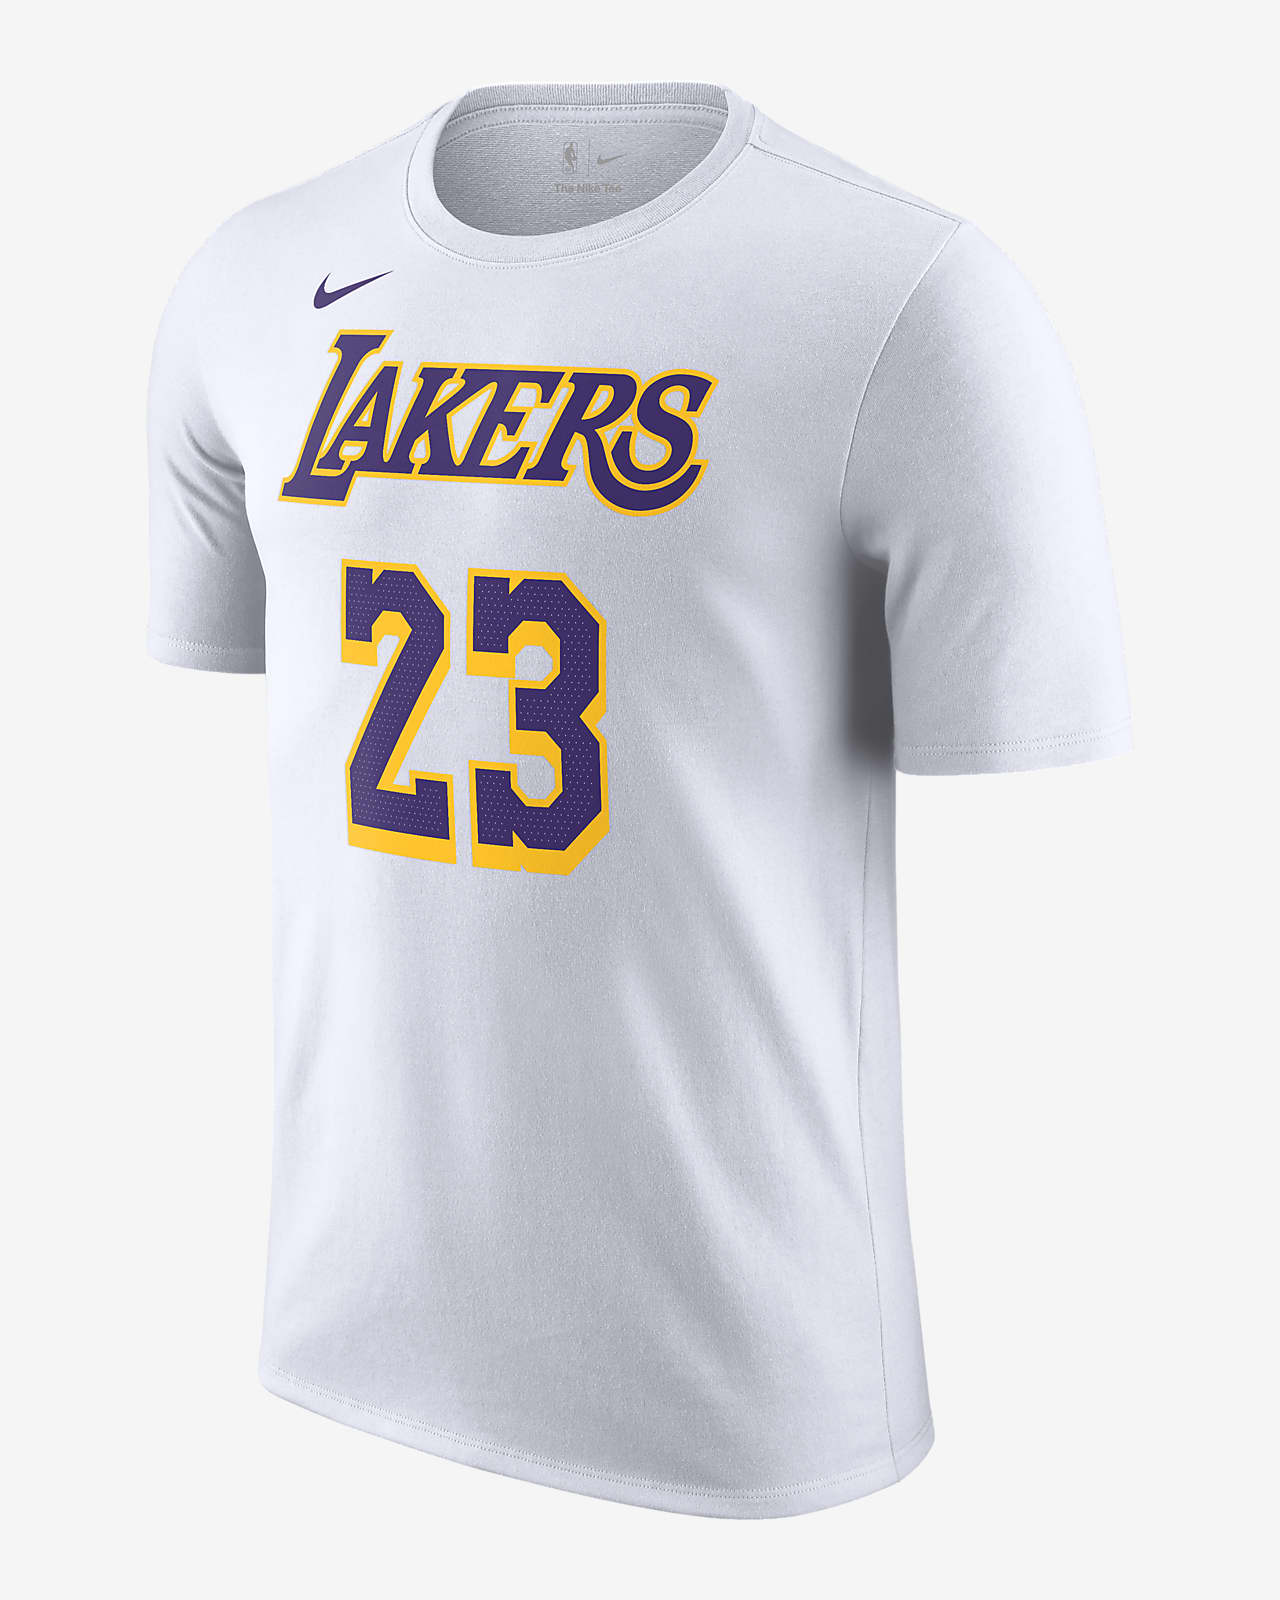 Tee-shirt Nike NBA Los Angeles Lakers pour Homme